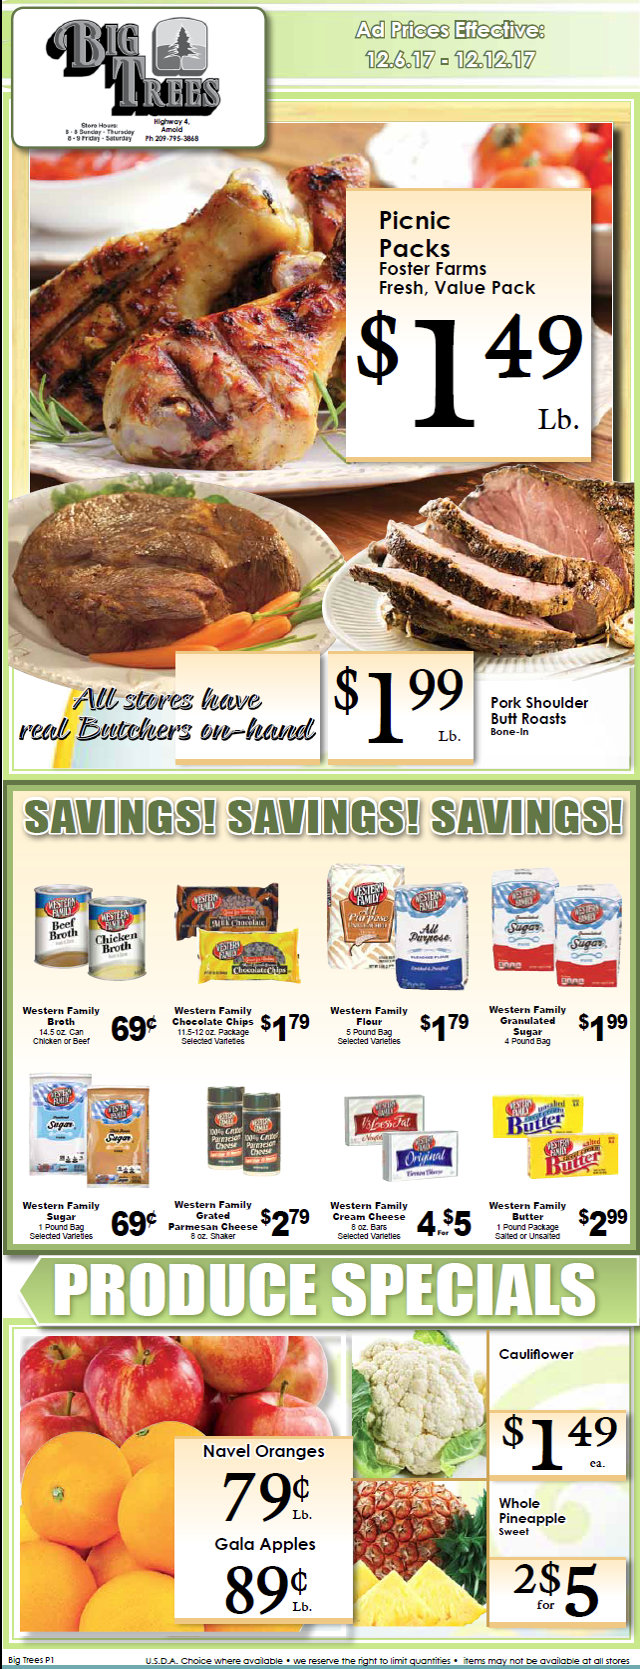 Big Trees Market Weekly Ad & Grocery Specials Through December 12th